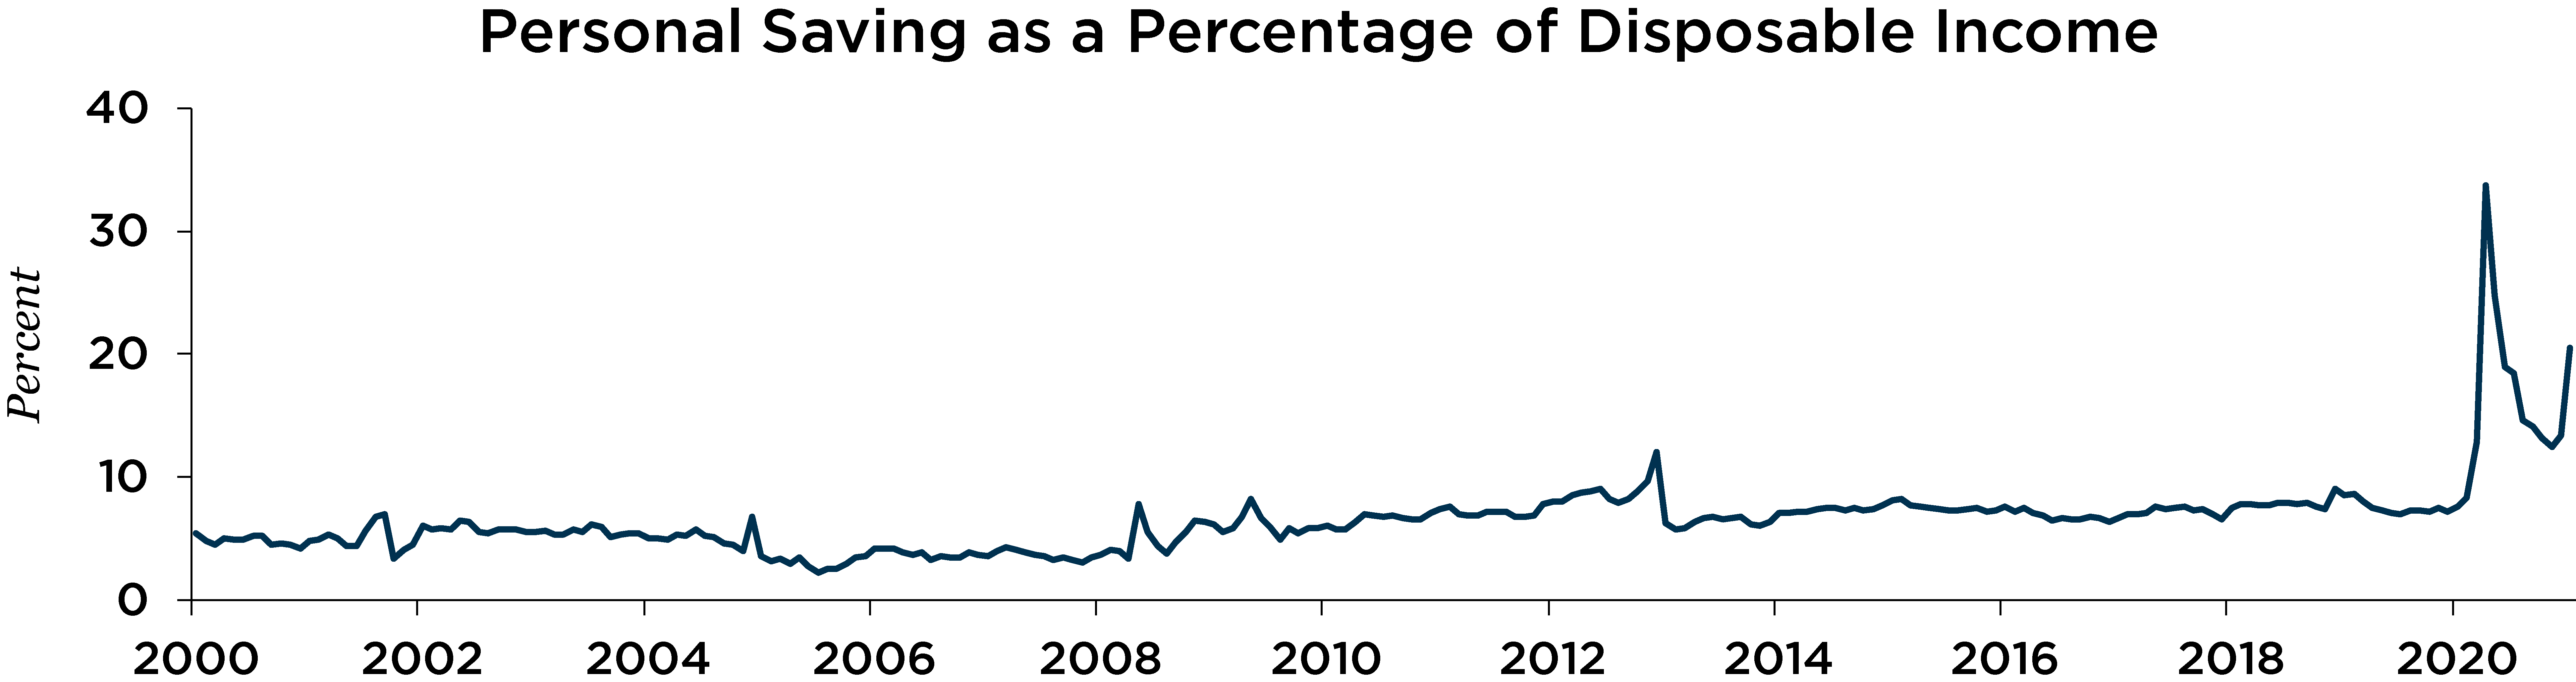 Graph depicting personal saving as a percentage of disposable income